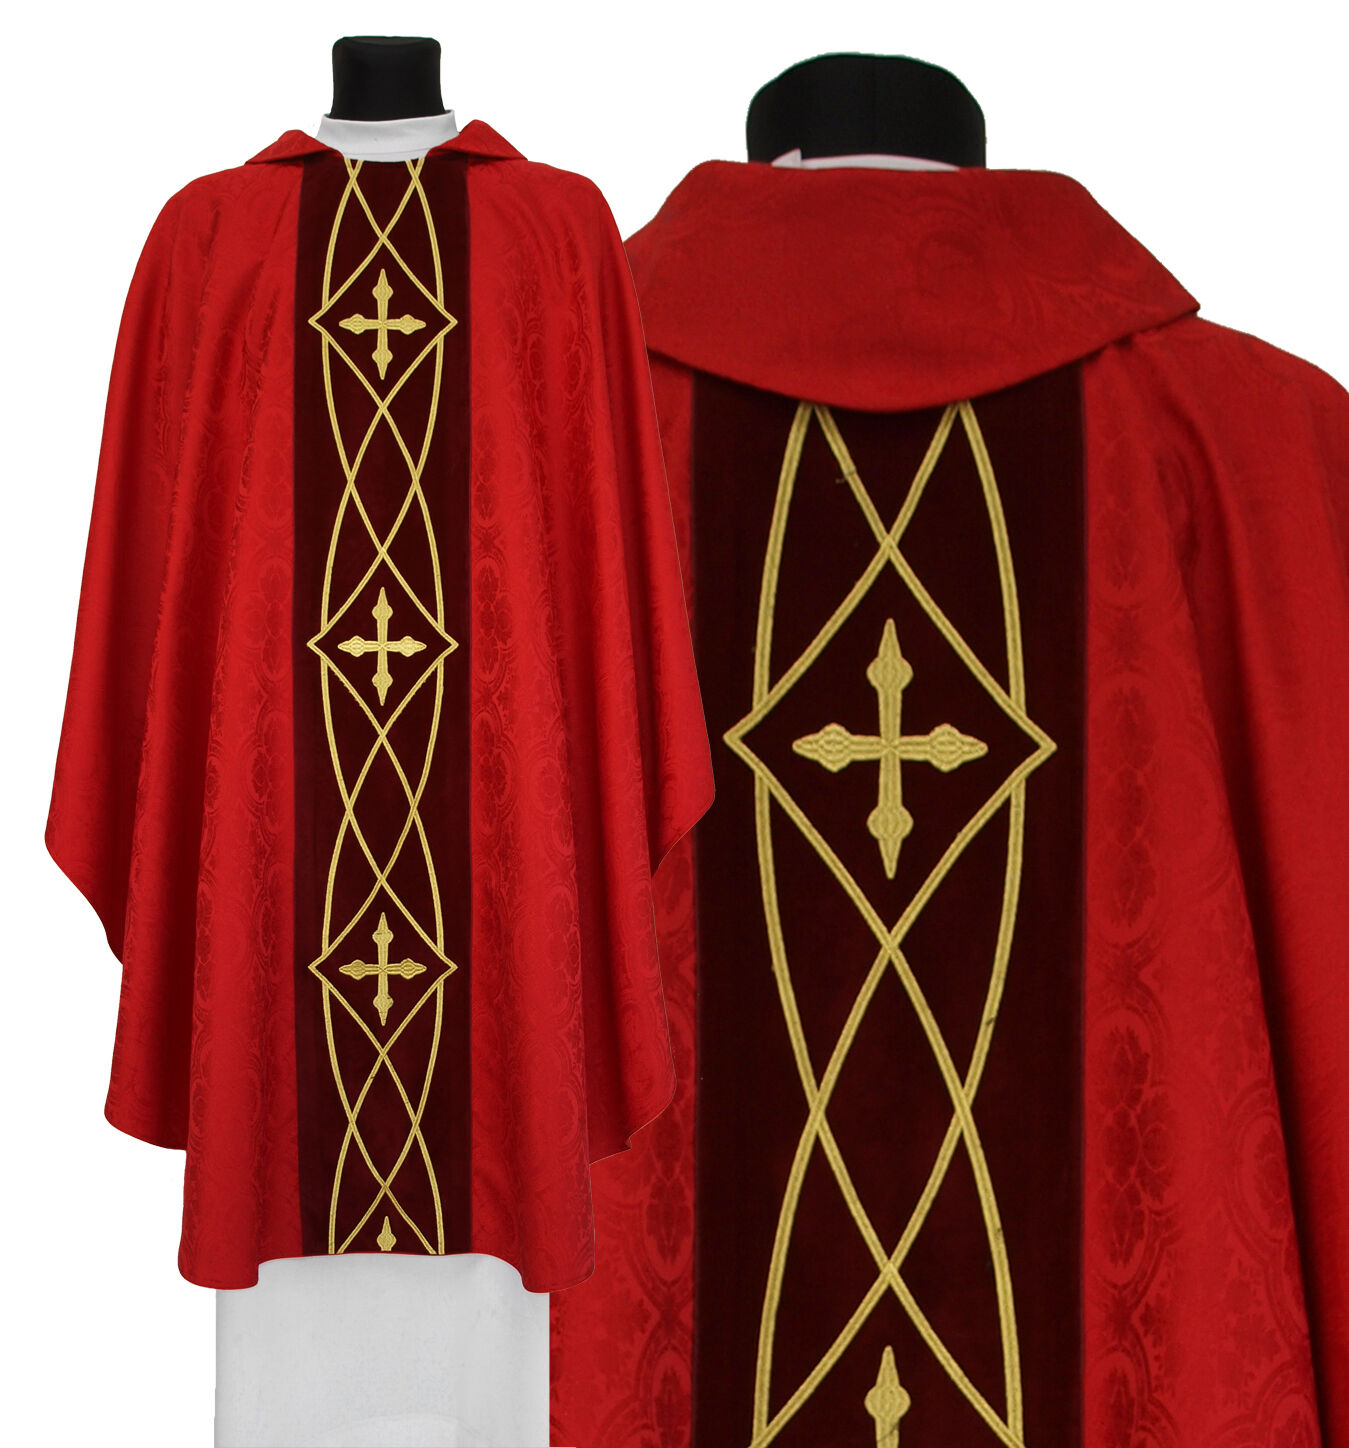 Red Gothic Chasuble with stole 590-AC25 Vestment Casulla Roja Casula Rossa Kasel